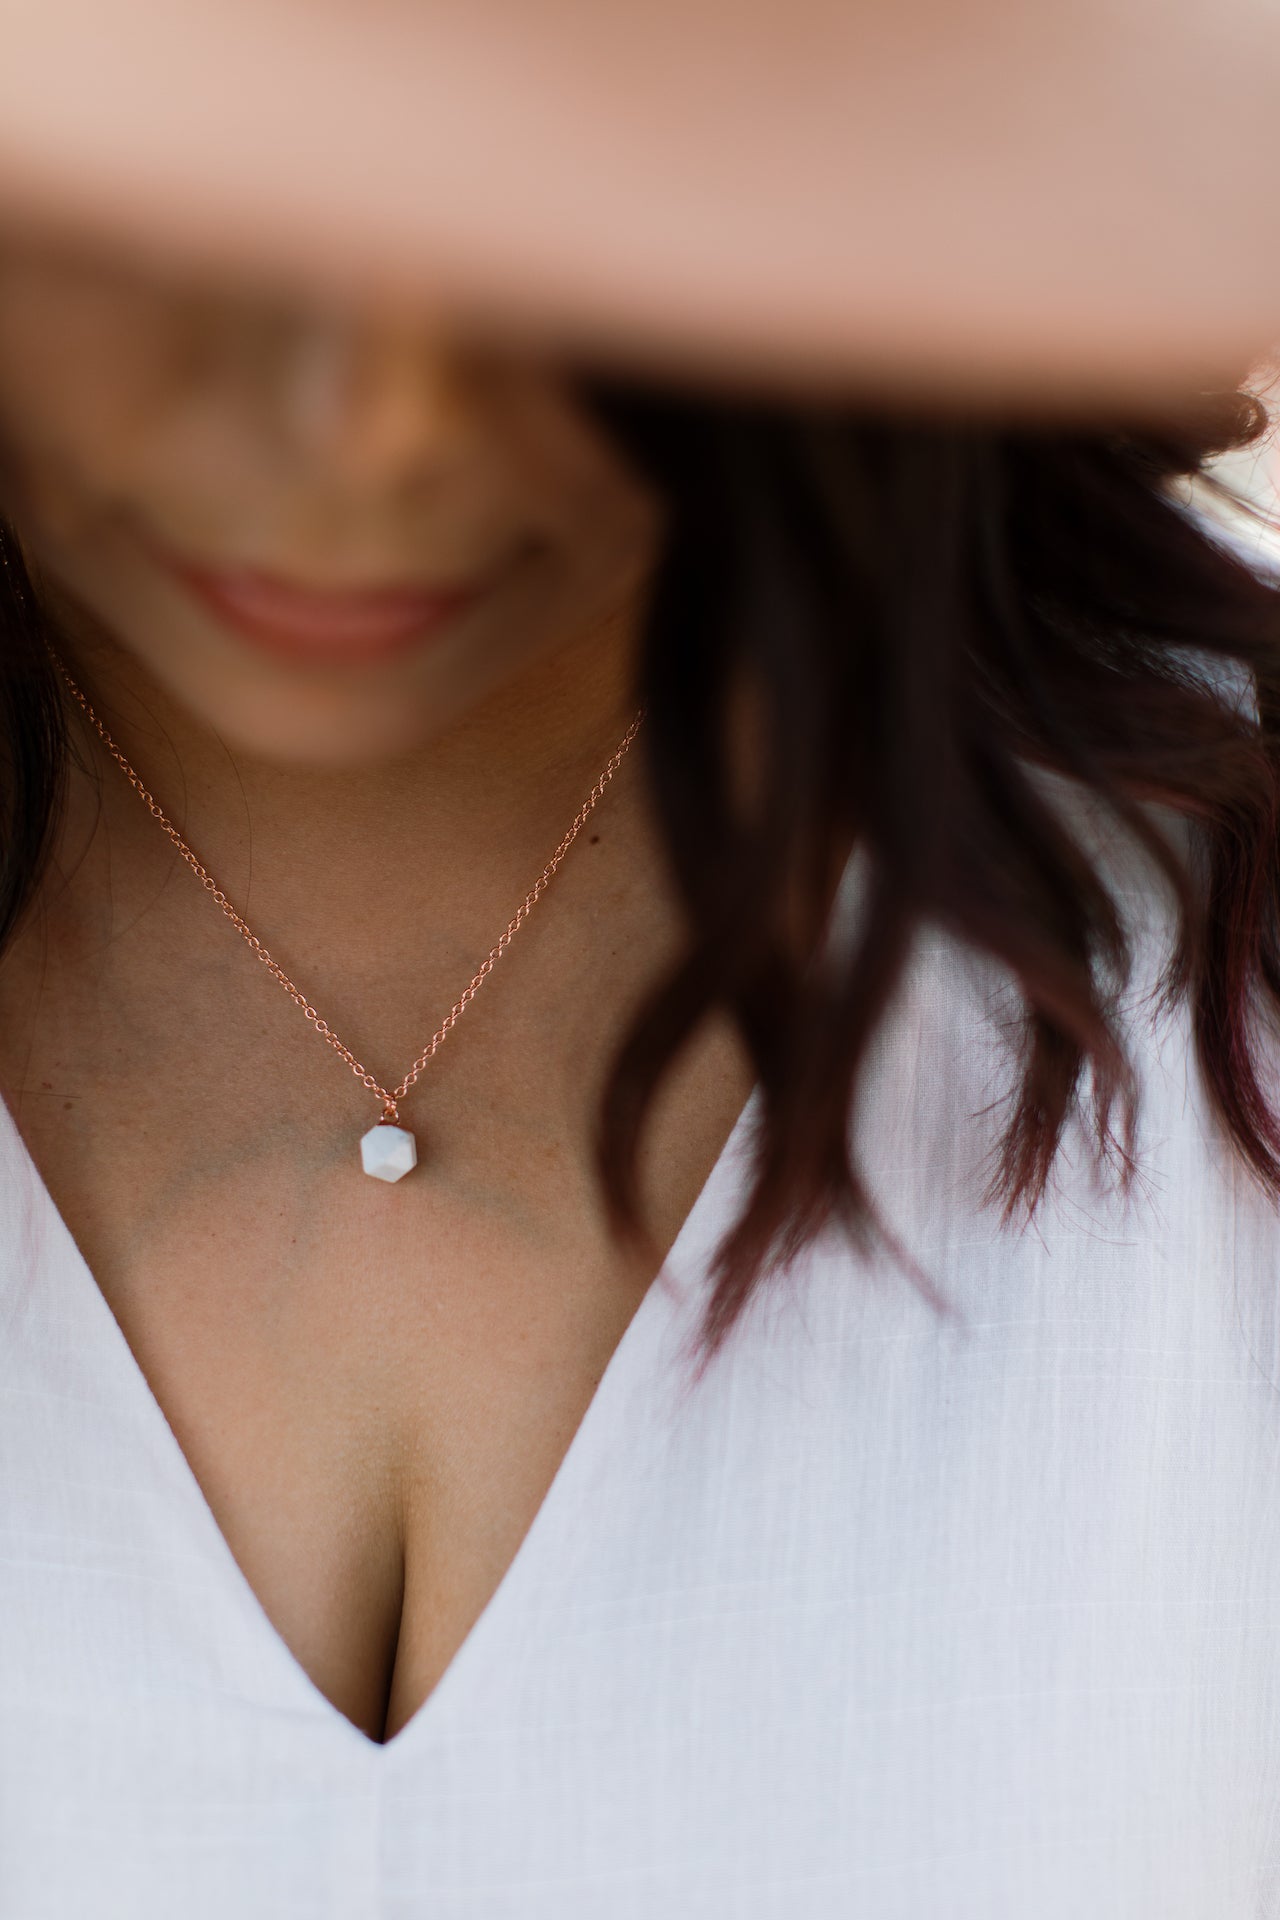 White Howlite Crystal Diffuser Necklace - Put on Love Designs